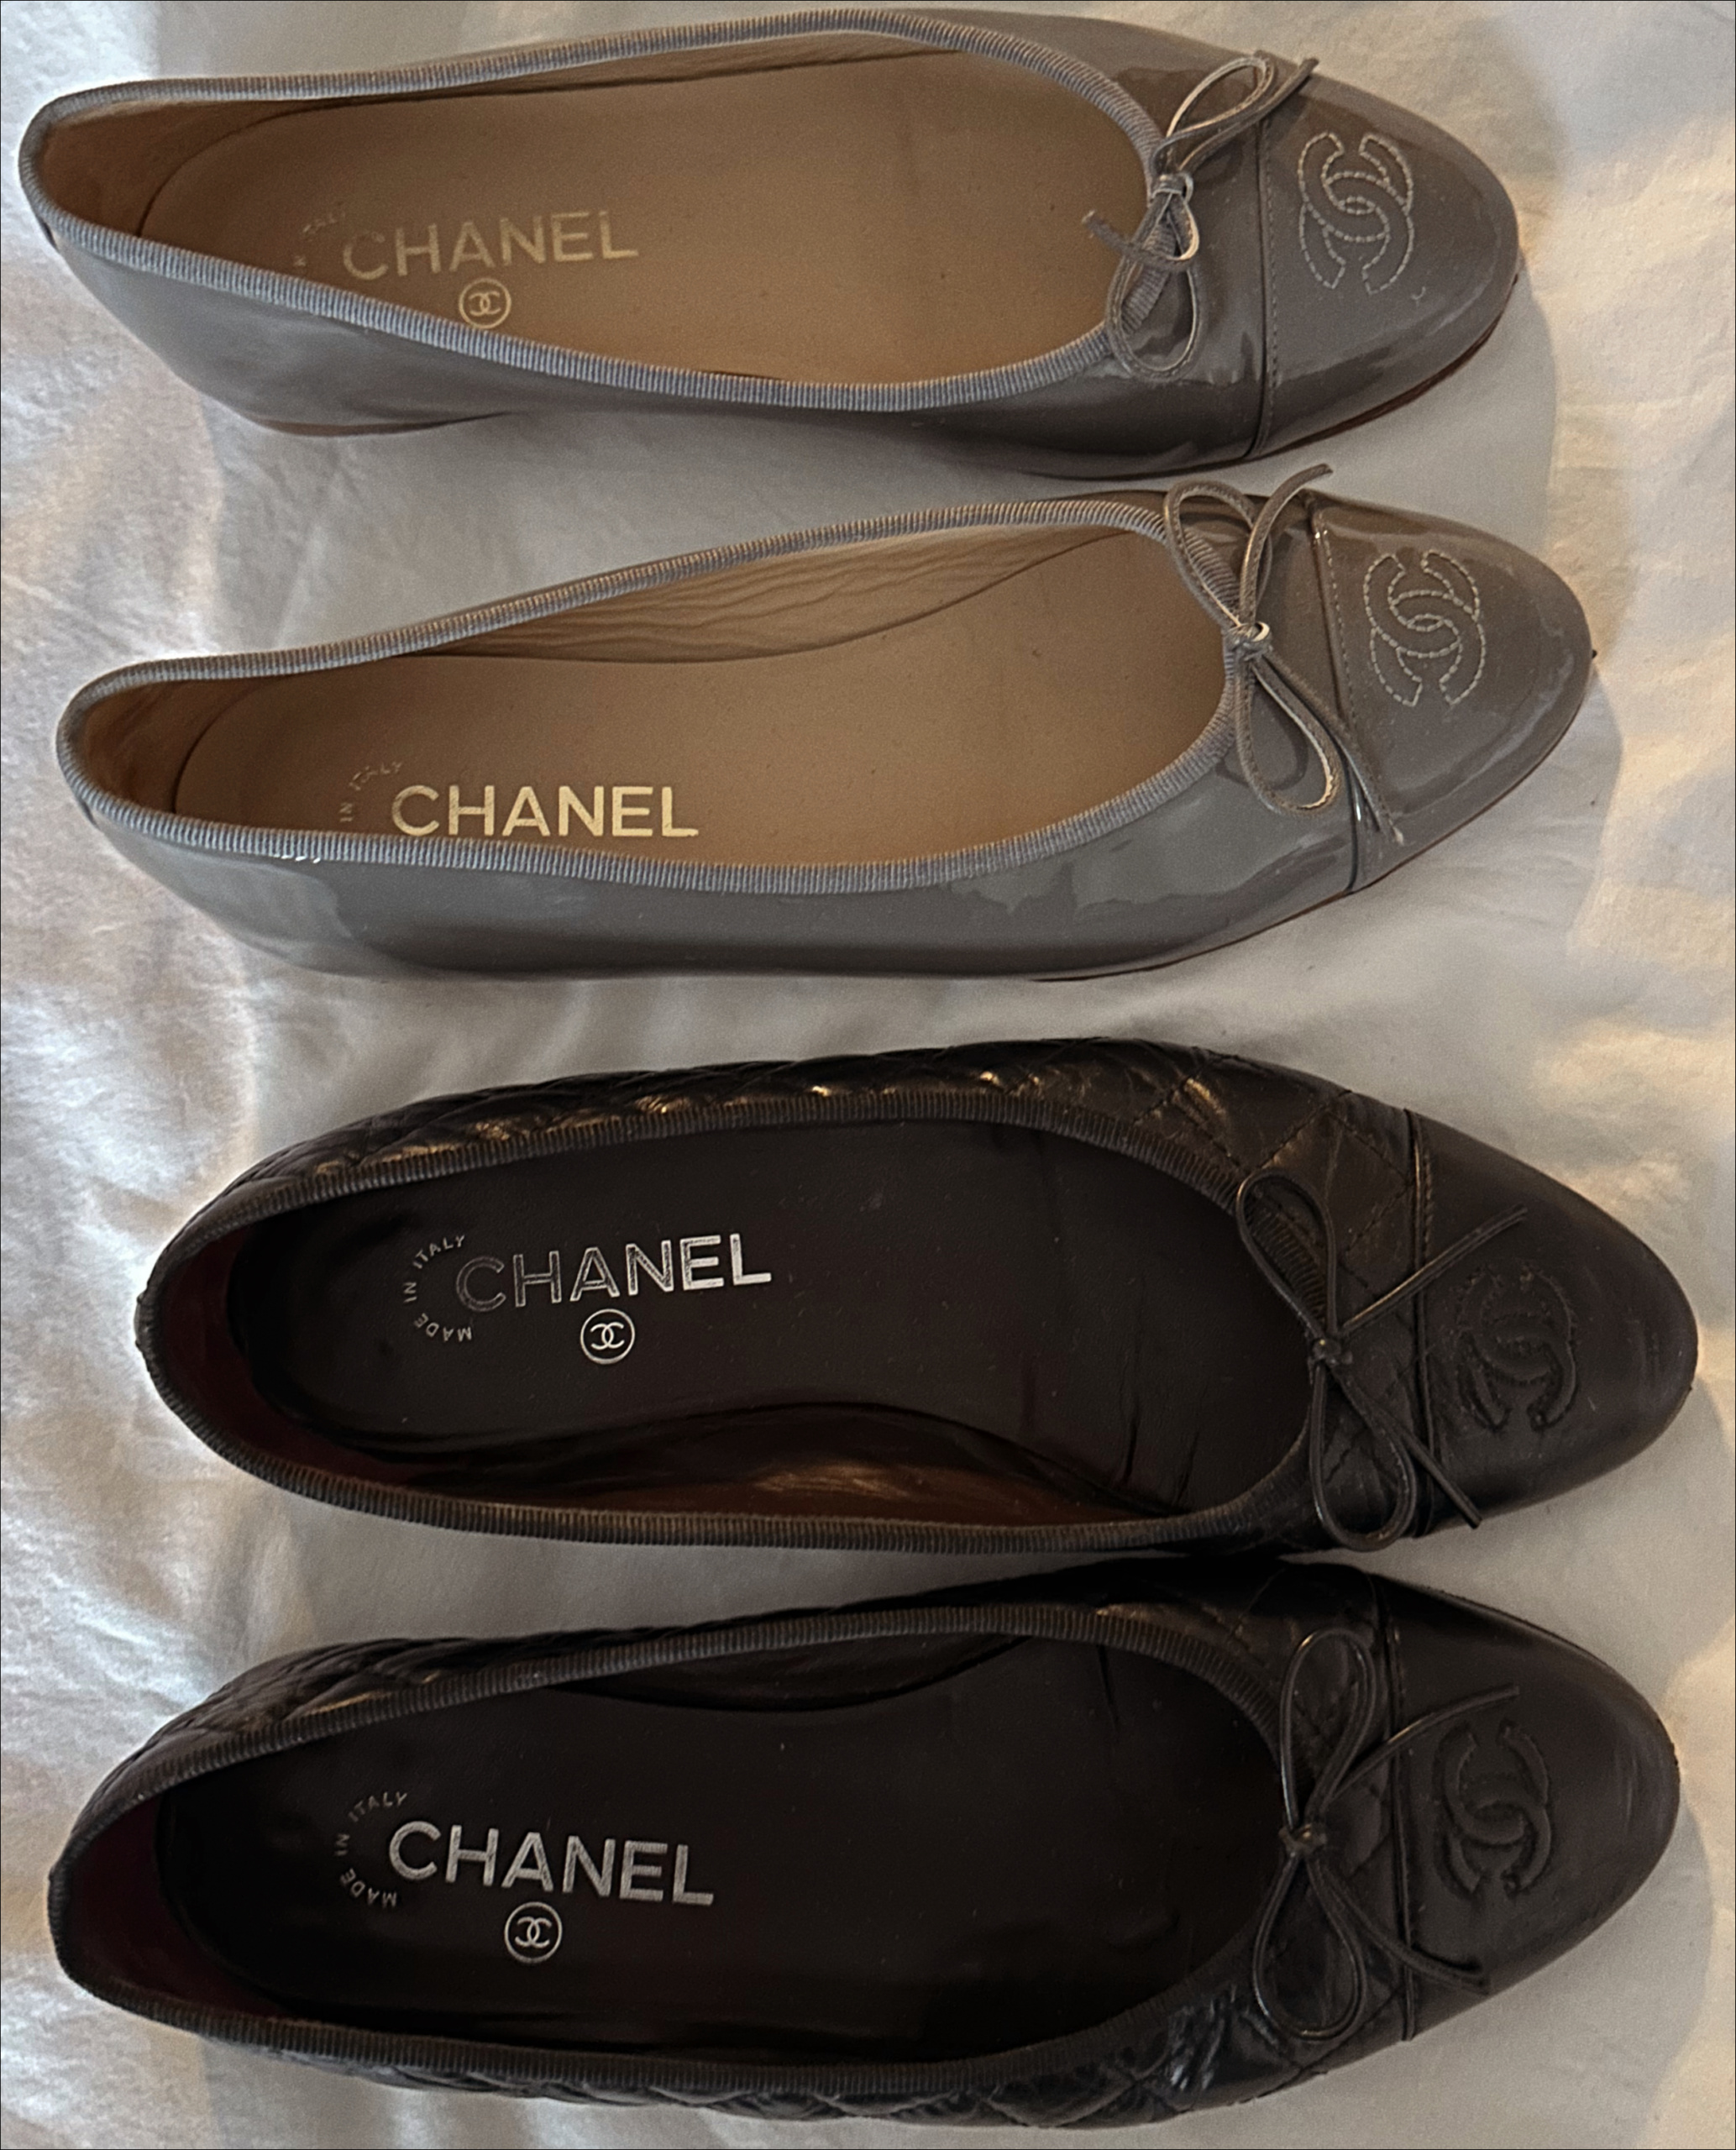 Chanel Flats Sizing & Buying Guide | Brooklyn Blonde